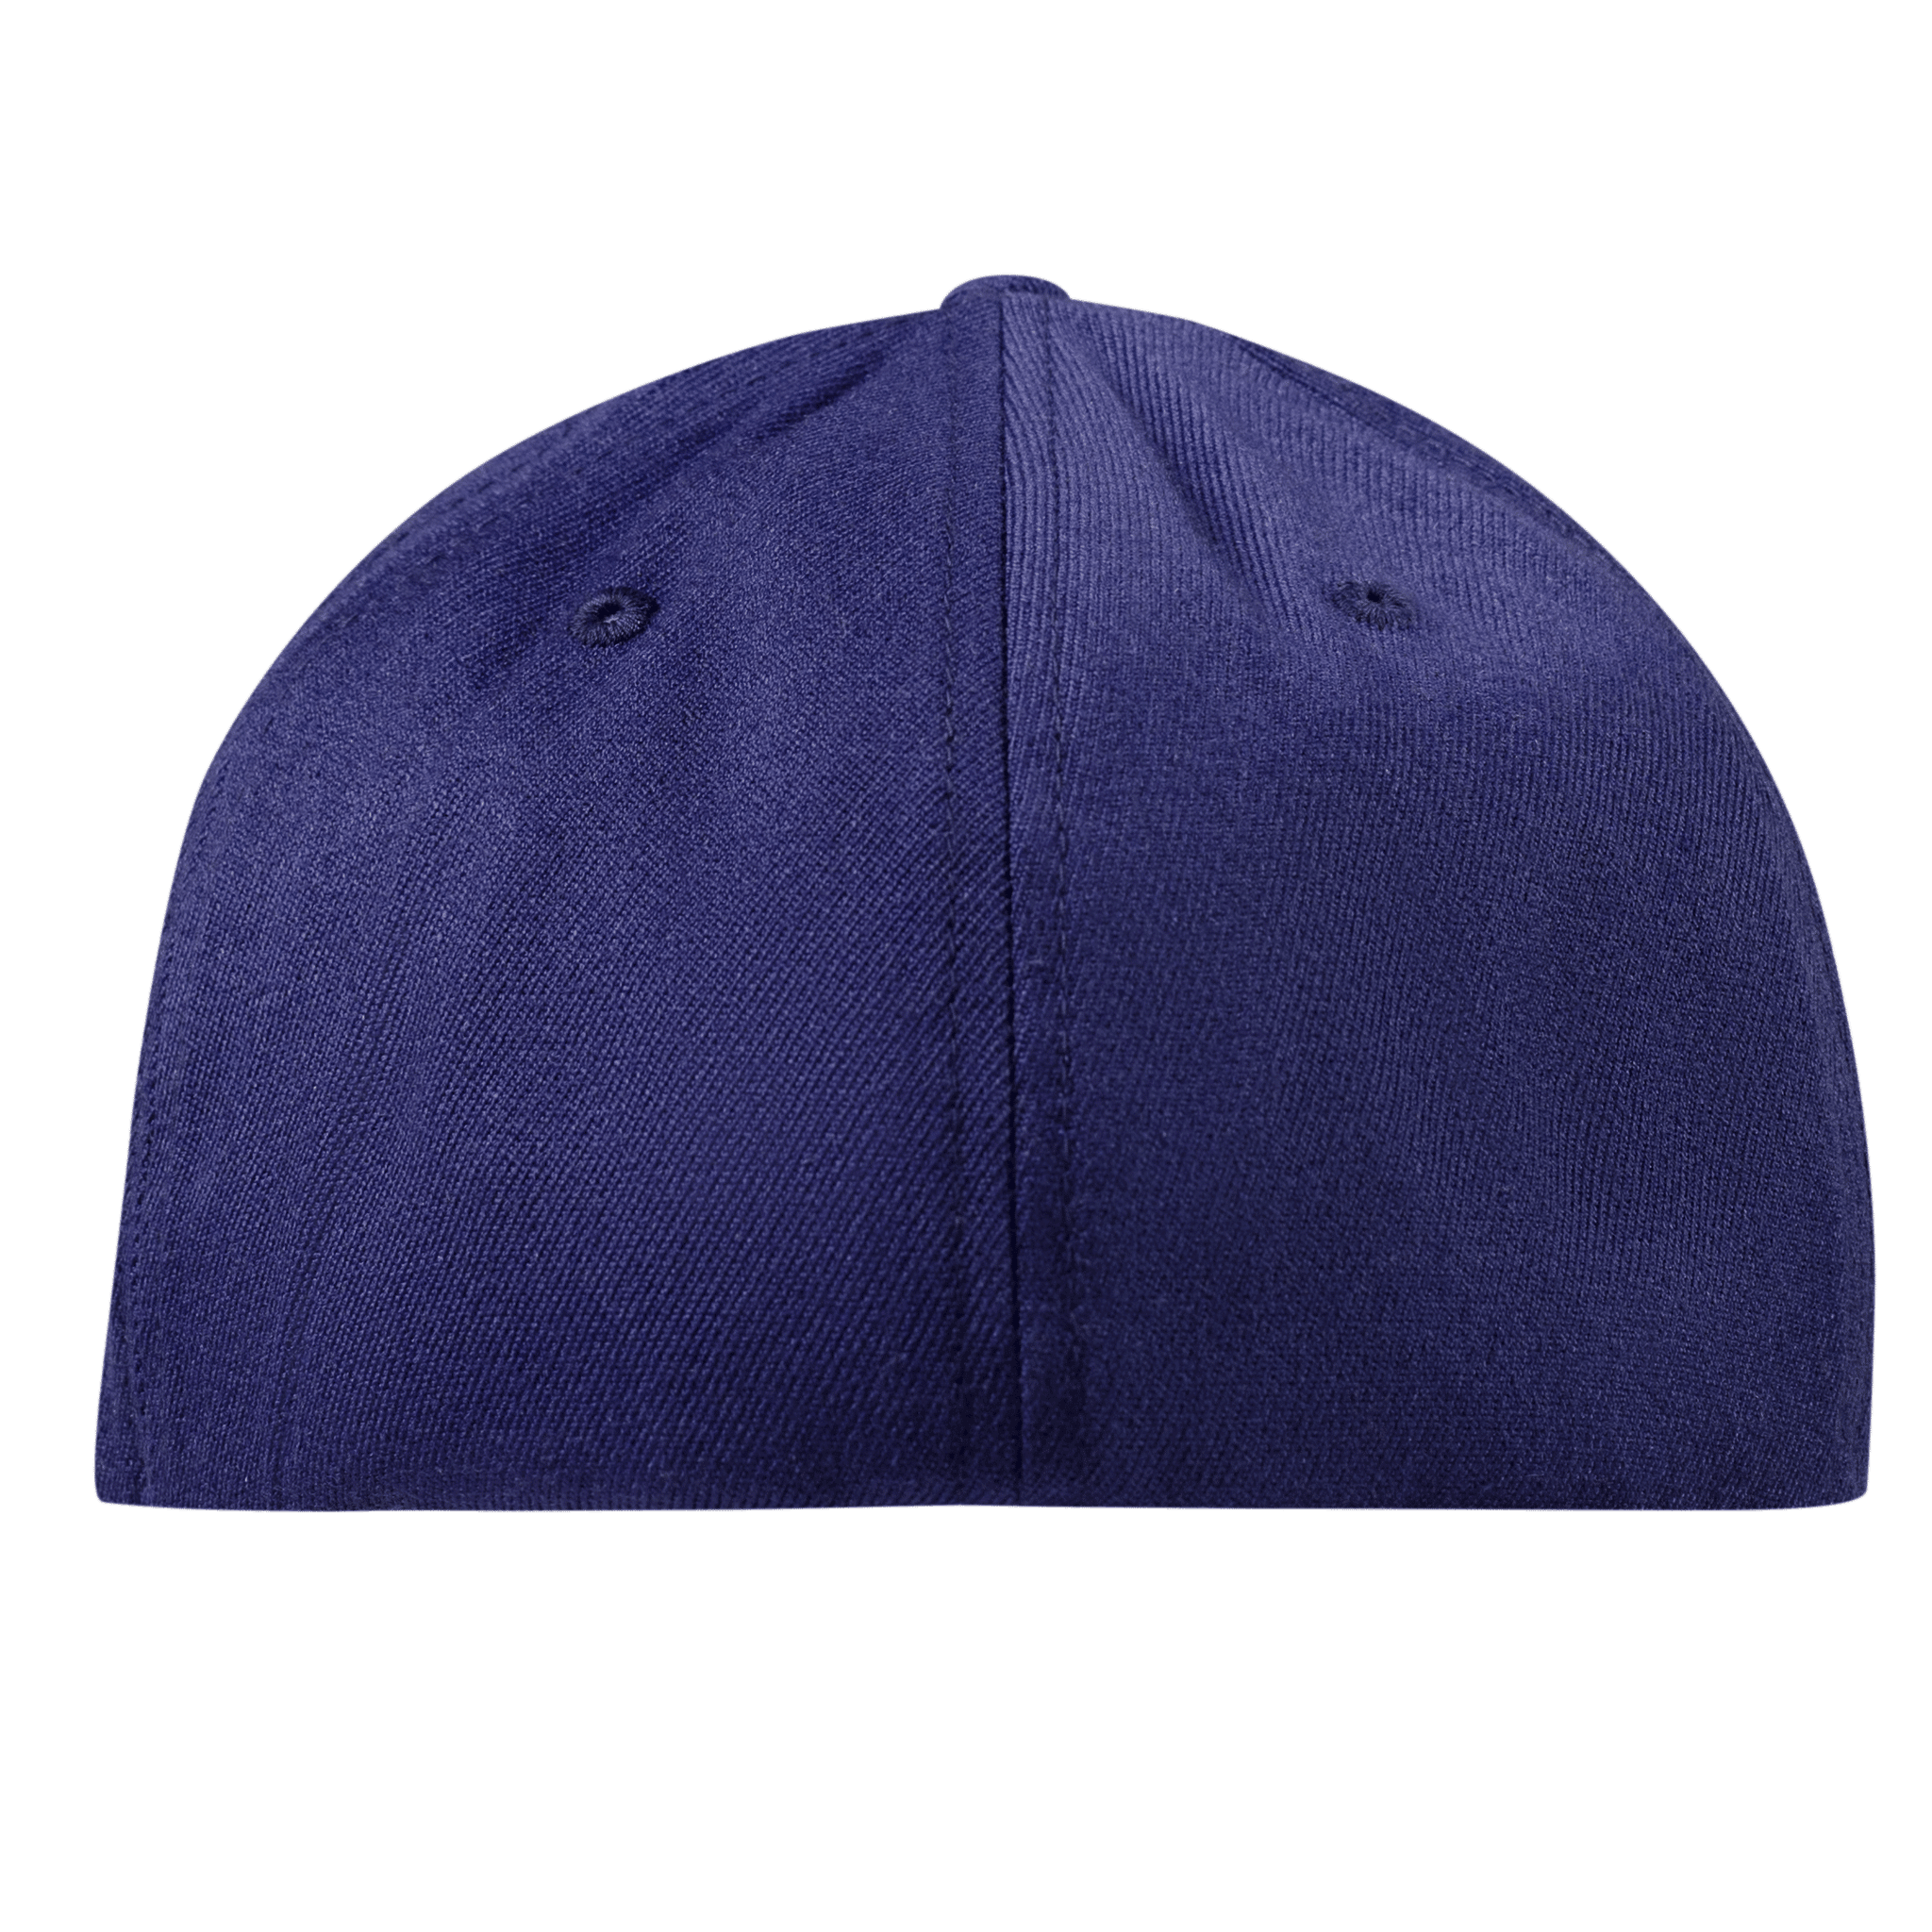 Wisconsin Vintage Flexfit Fitted Back Navy